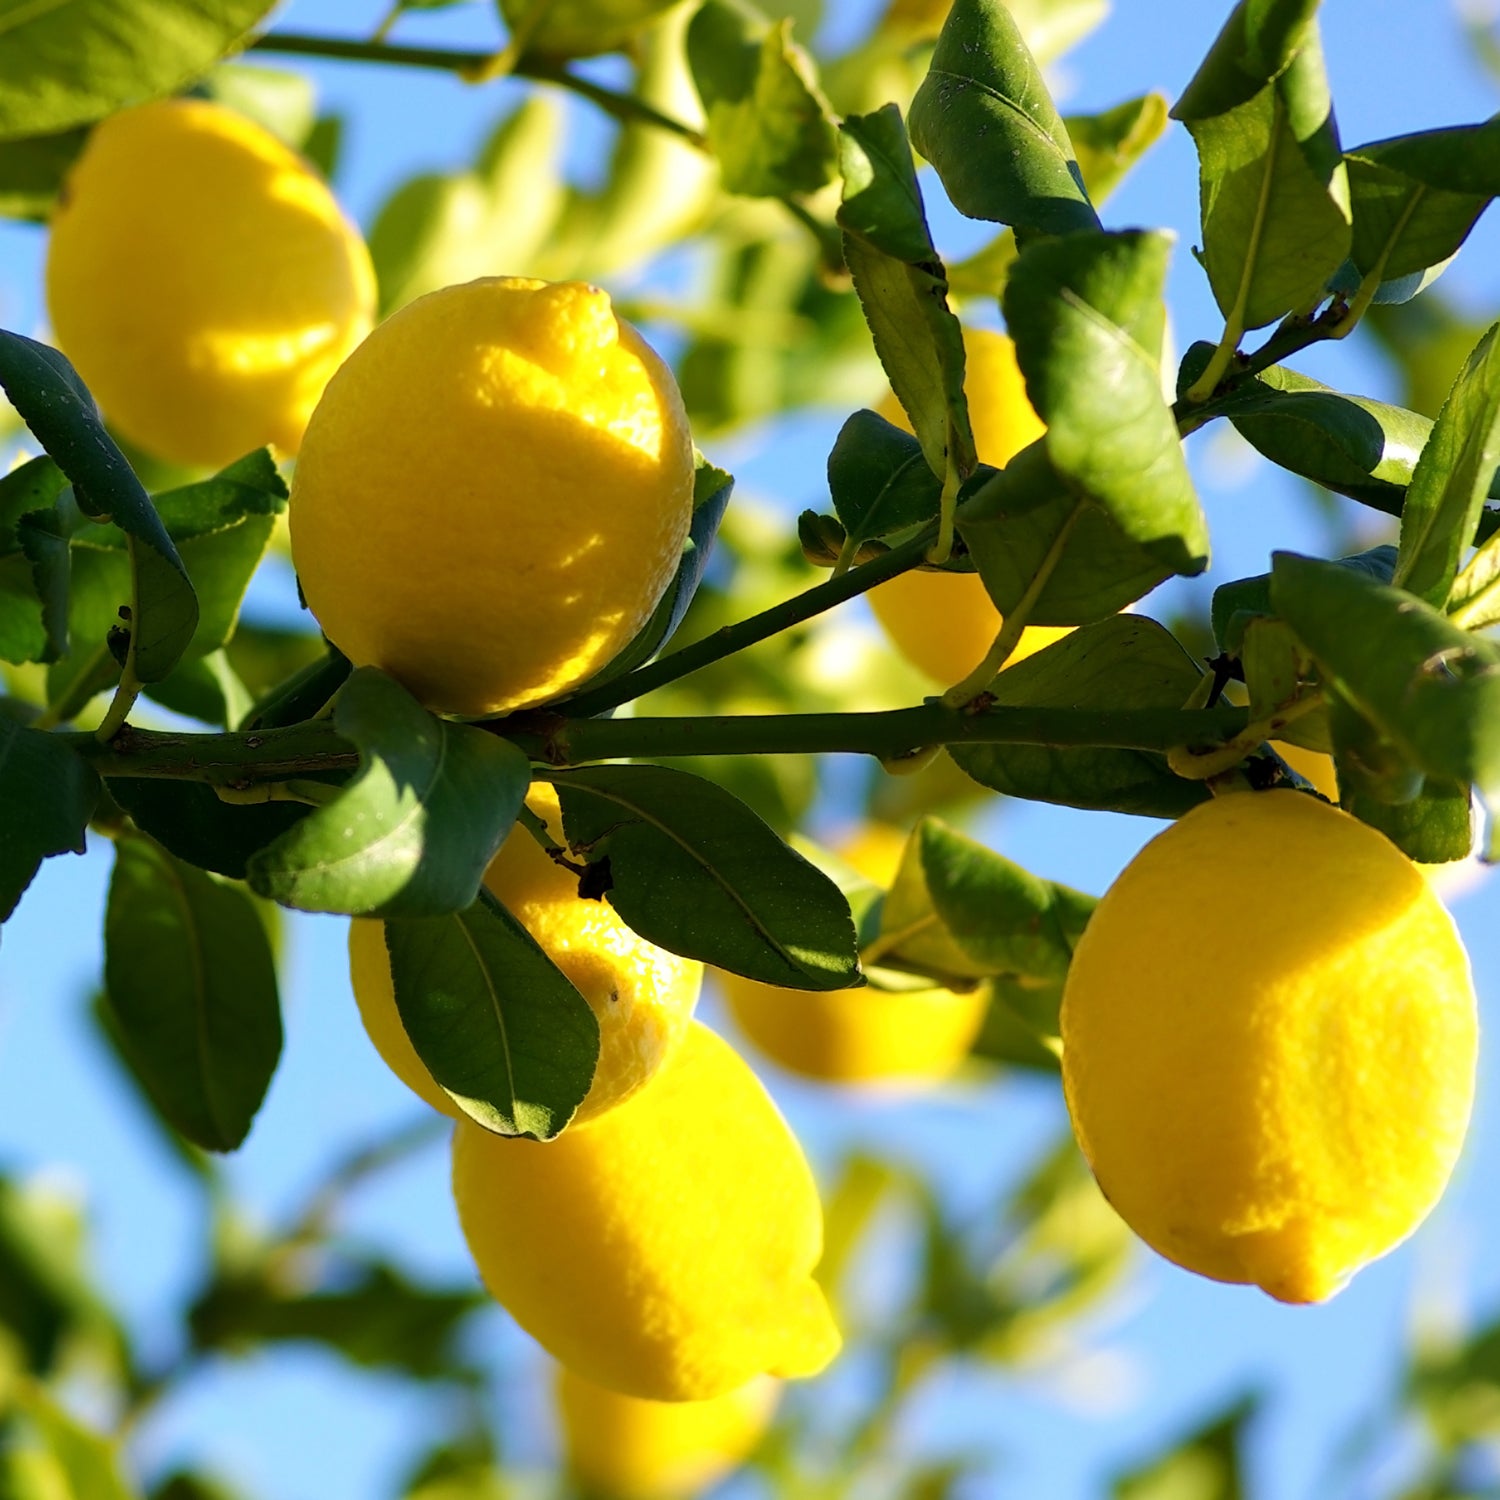 Ripe lemons on a tree branch - the inspiration for Lemon Sugar, a bright, refreshing scented candle from Tuscany Candle's Serene Clean® collection of odor-destroying scented candles